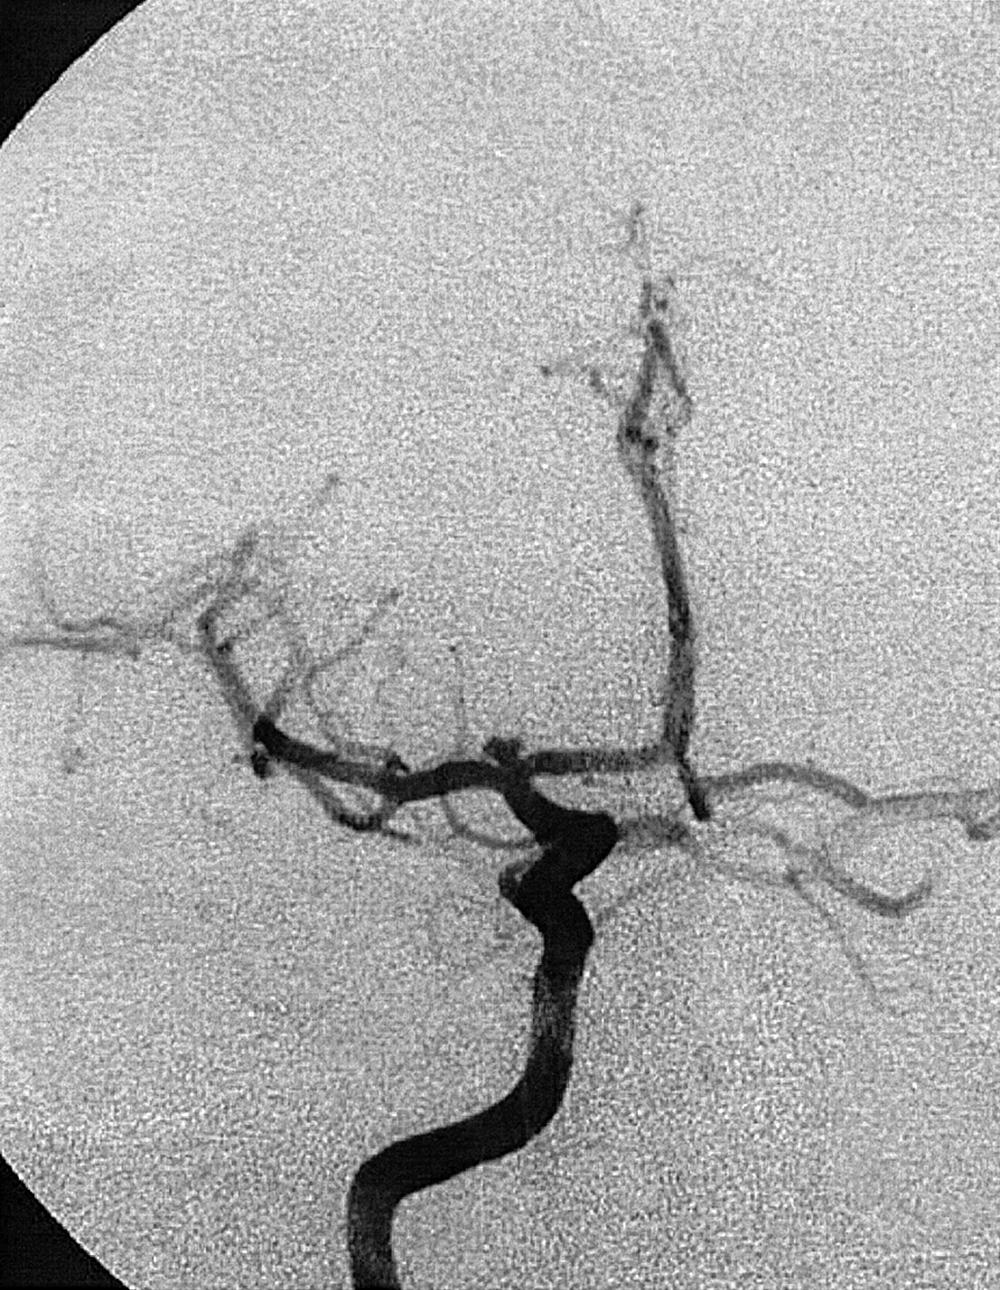 Fig. 49.10, Right internal carotid artery injection, anteroposterior projection, arterial phase, demonstrating a carotid bifurcation aneurysm. The aneurysm is bilobed and irregular in contour.